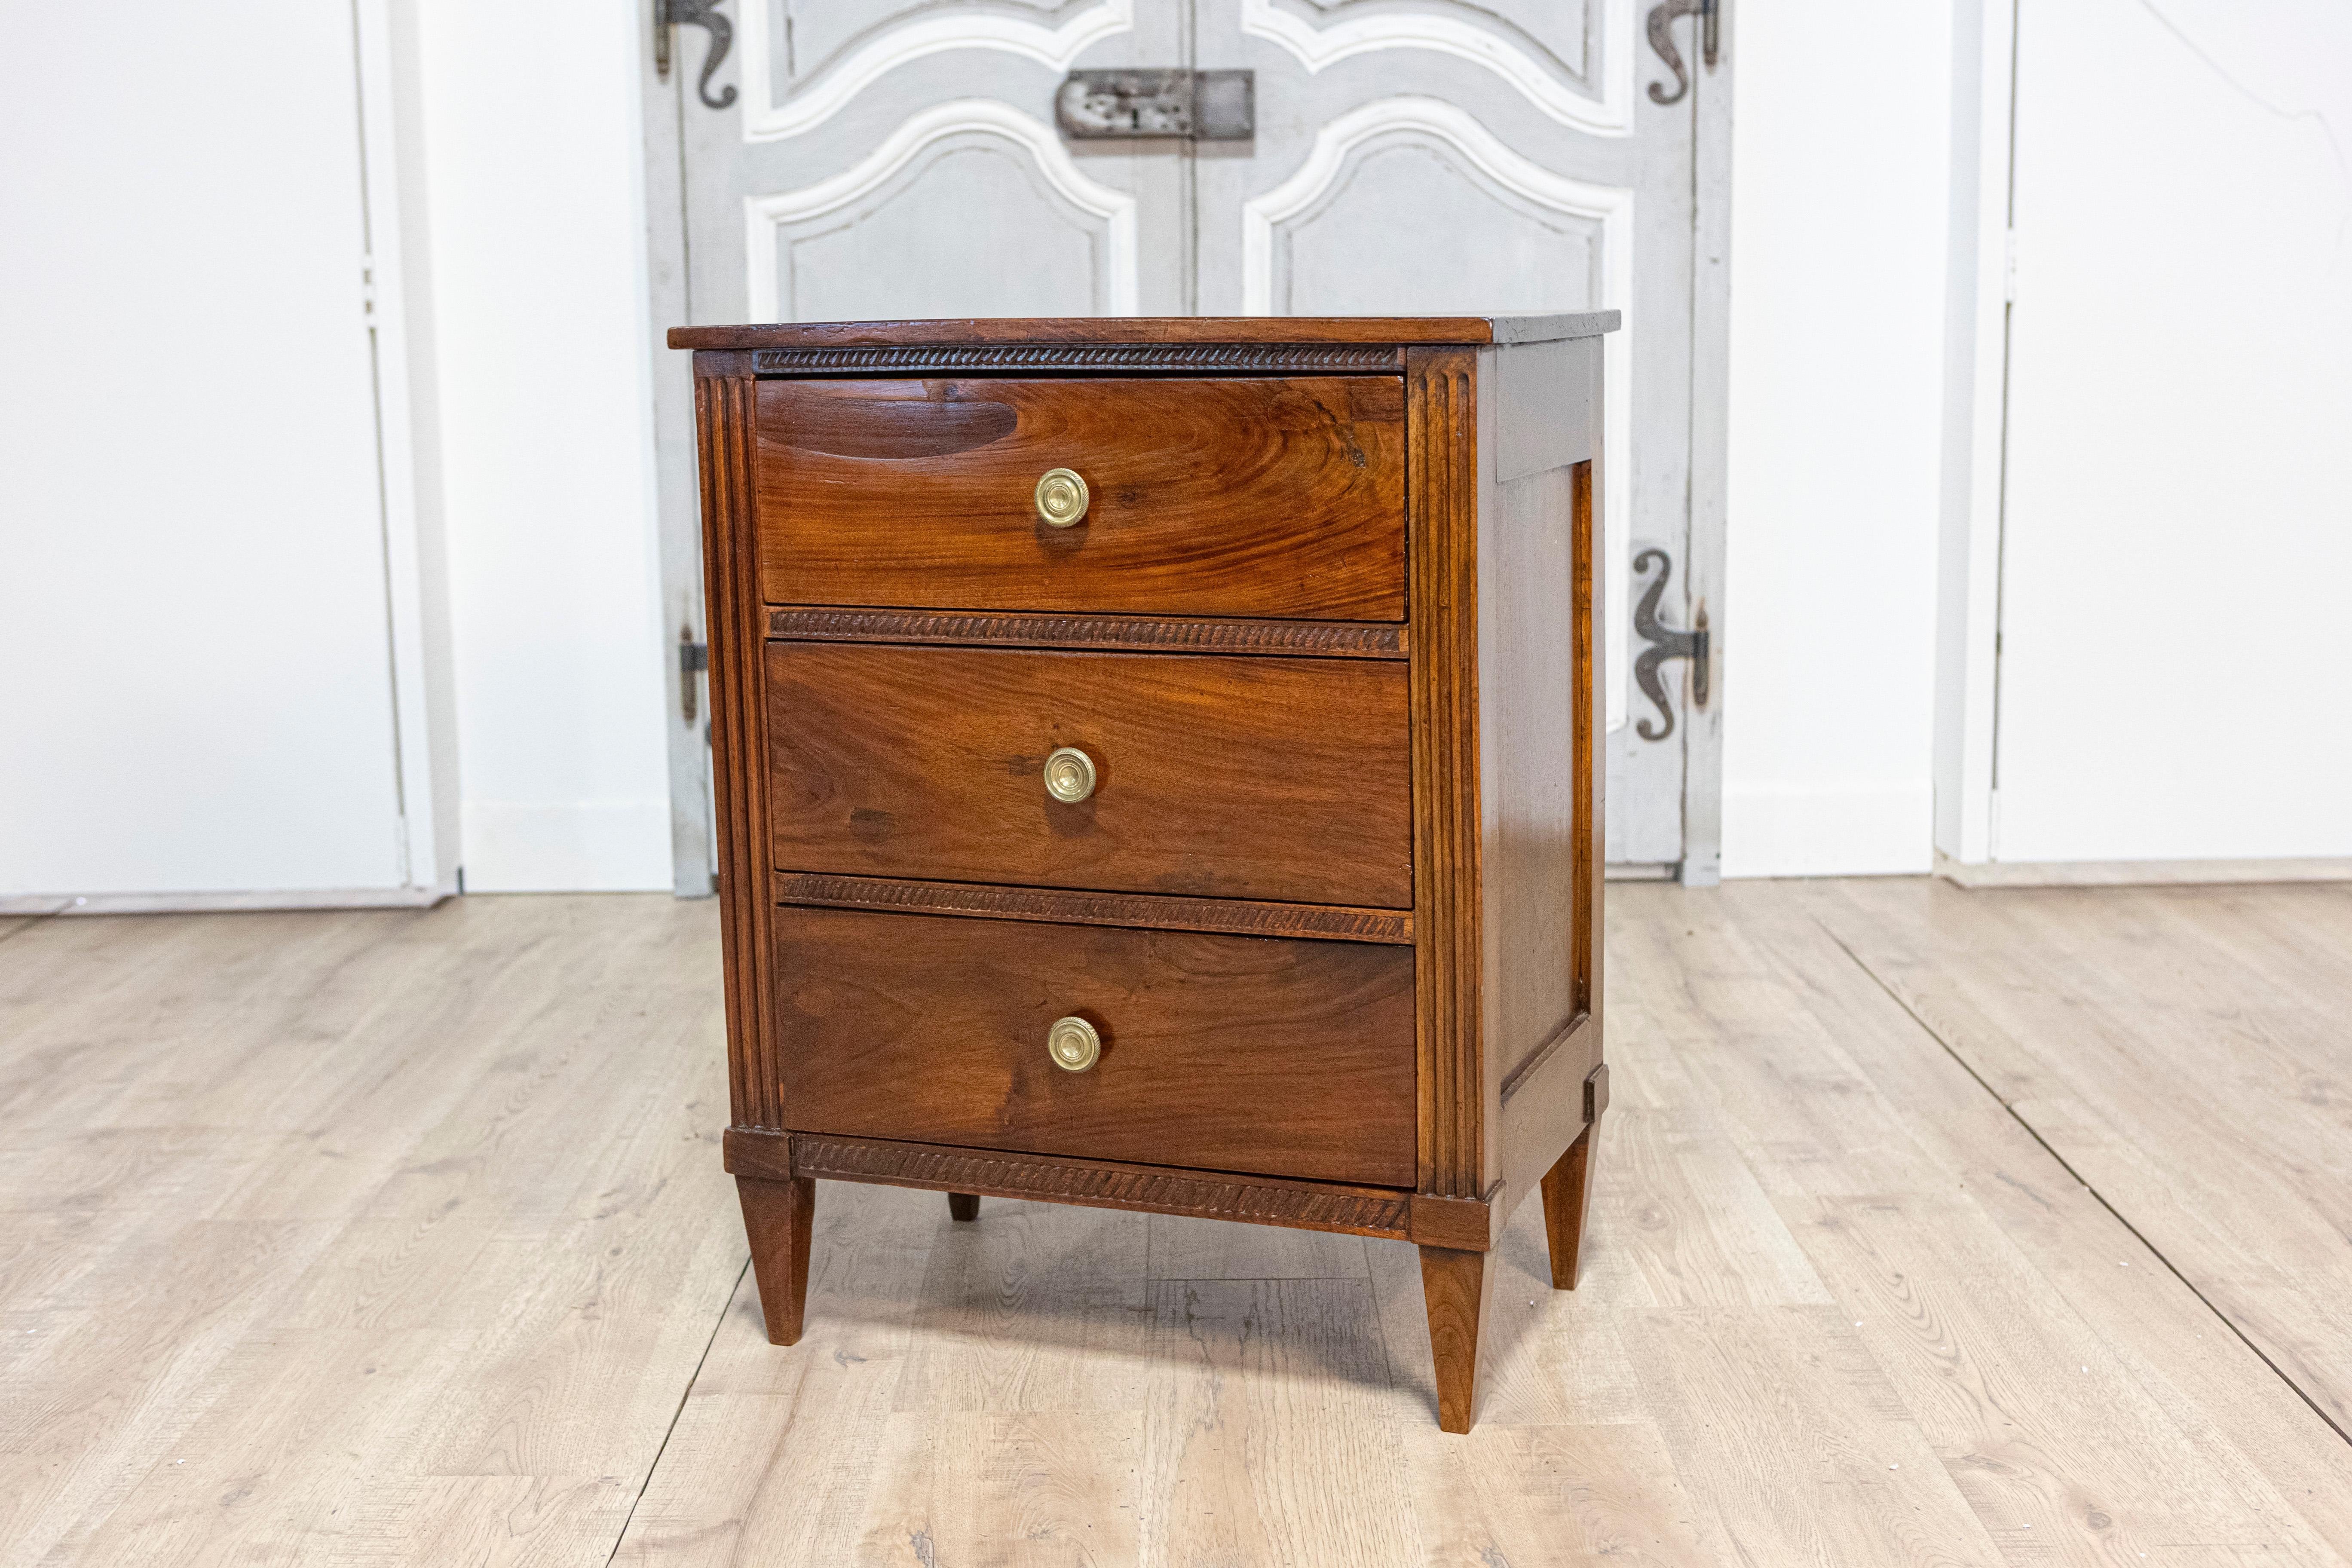 Italian Directoire Period Late 18th Century Three Drawer Walnut Bedside Chest For Sale 3